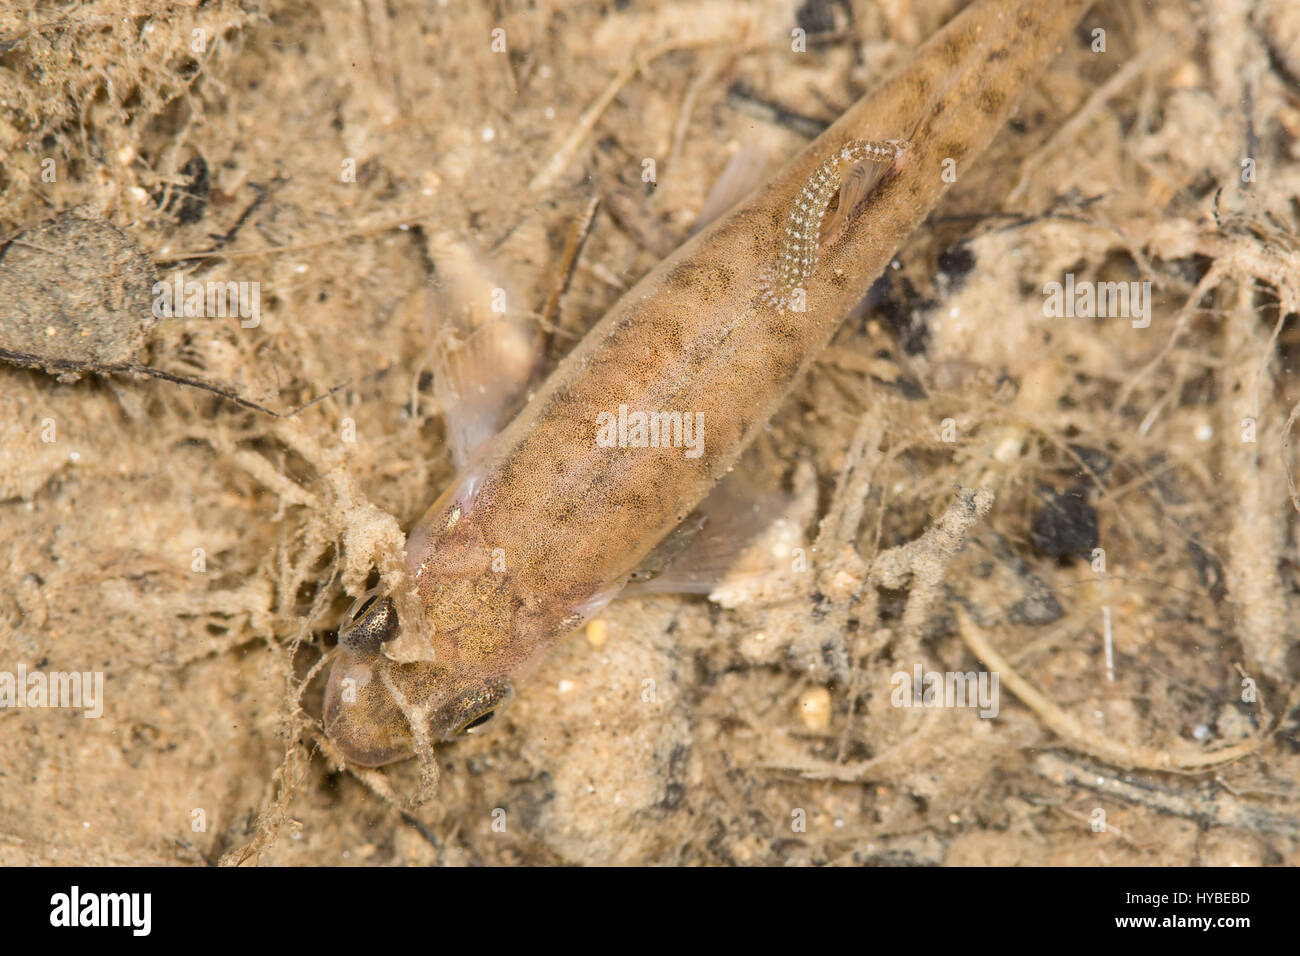 Leech (Hemiclepsis marginata) feeding on freshwater fish. Small fish with parasite attached in small tributary to River Avon. Uncertain identification Stock Photo